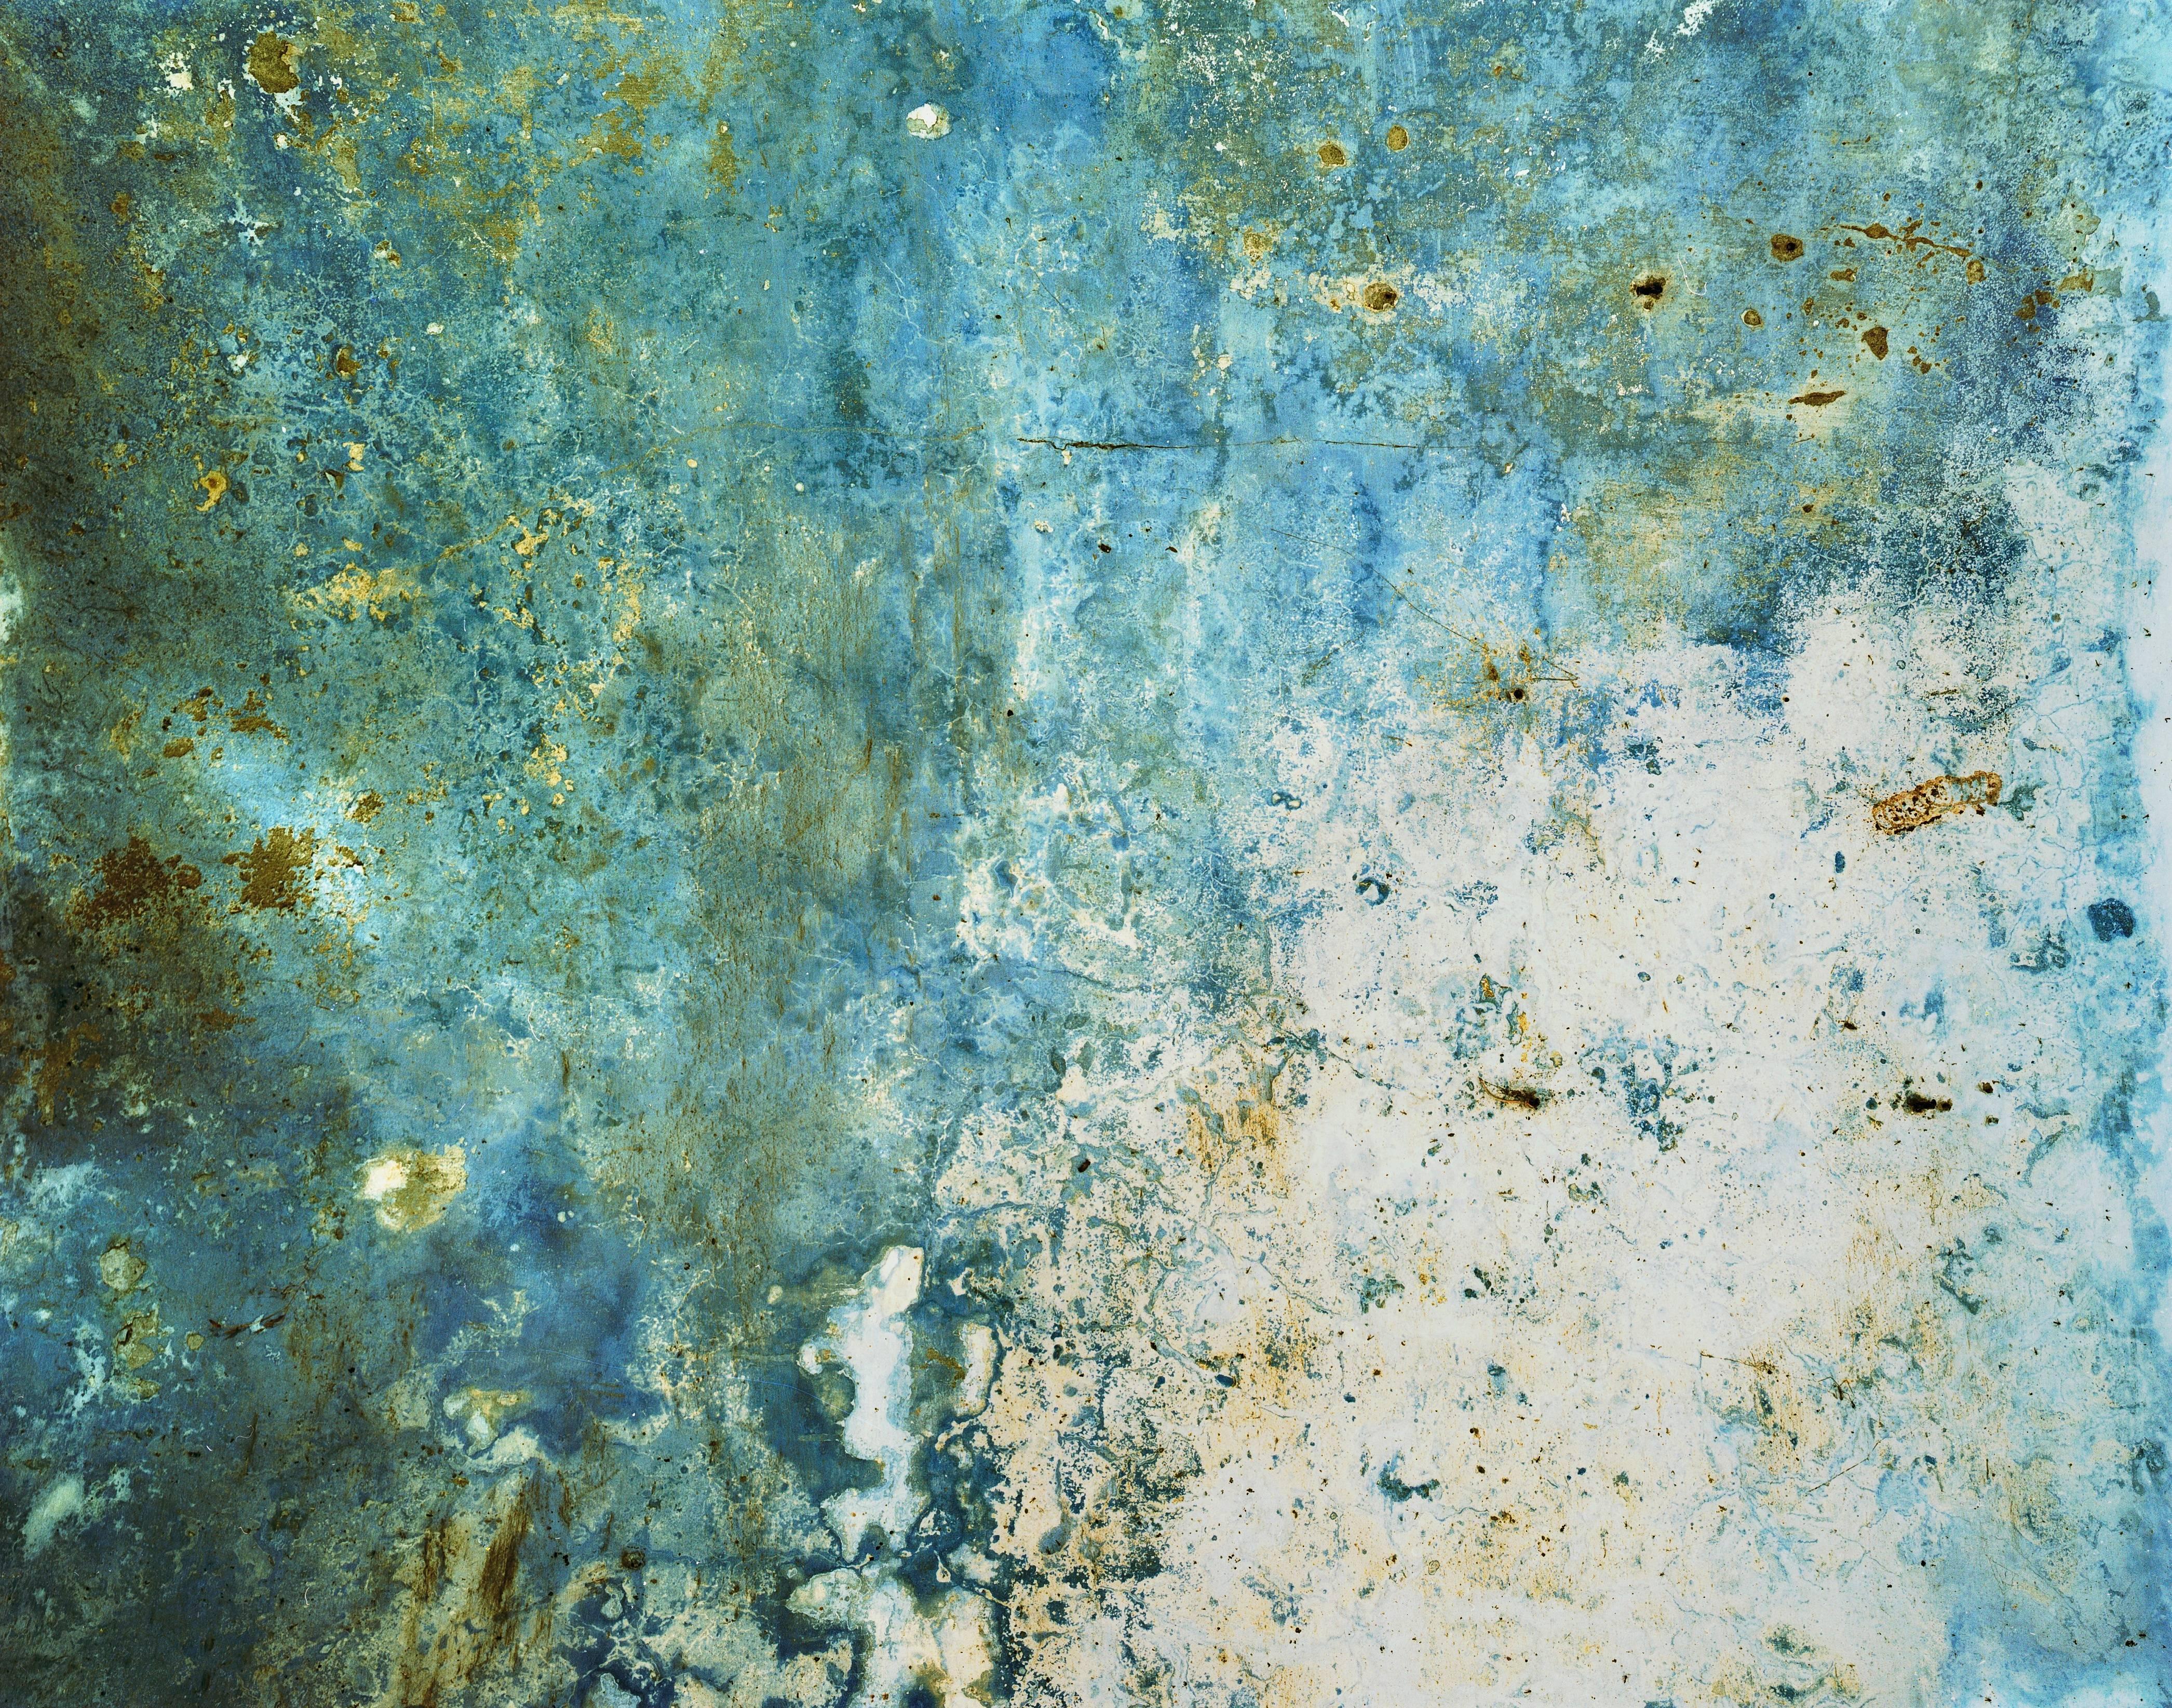 Sasha Bezzubov and Jessica Sucher Abstract Photograph - "Beatles 39" 30"x40" large format abstract photograph (blue, green, white, ochre